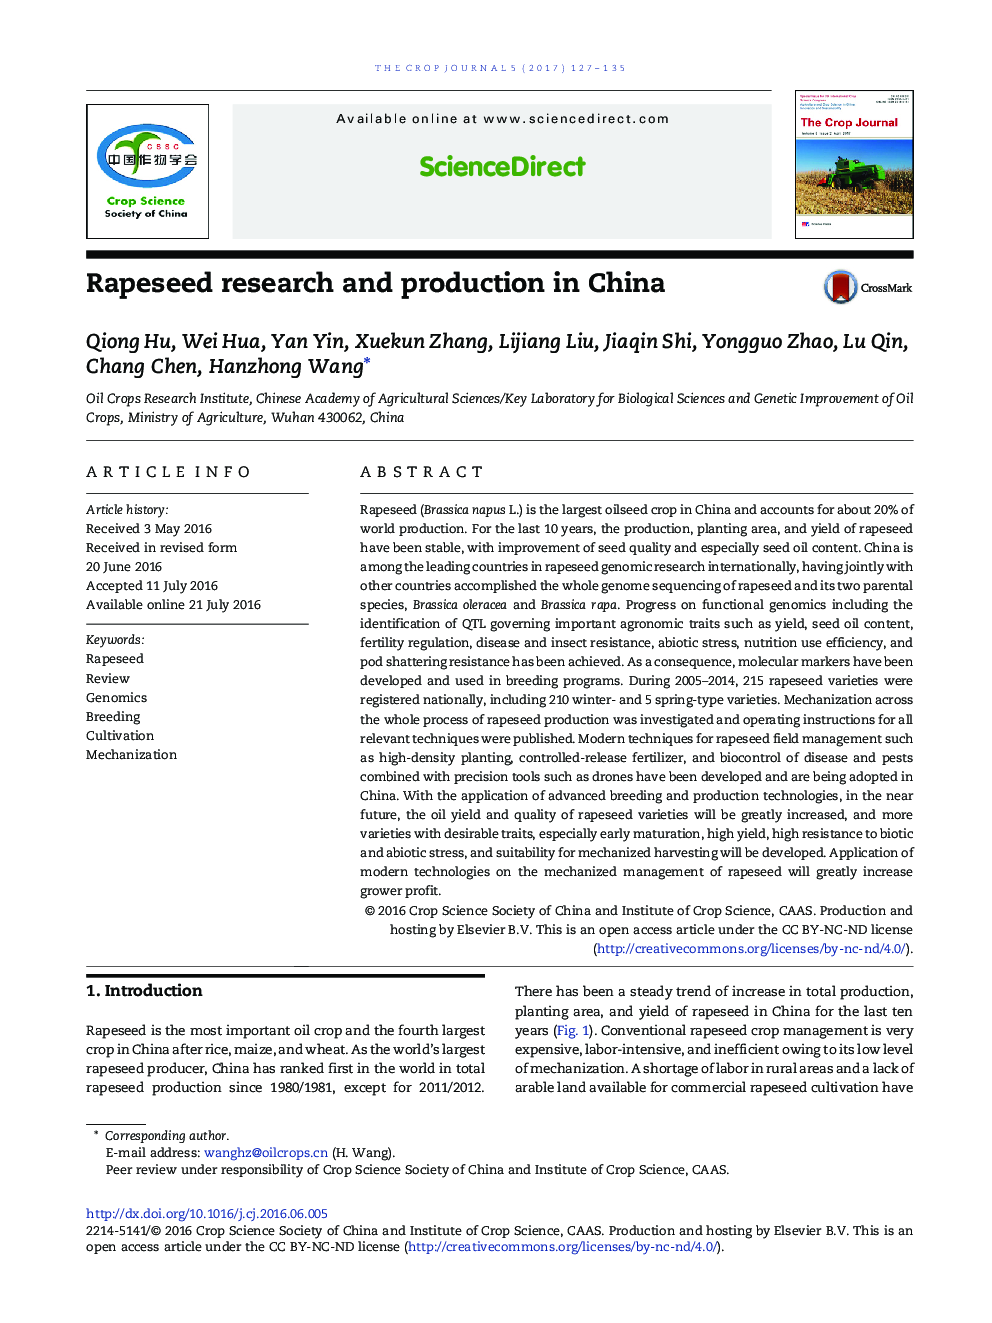 Rapeseed research and production in China